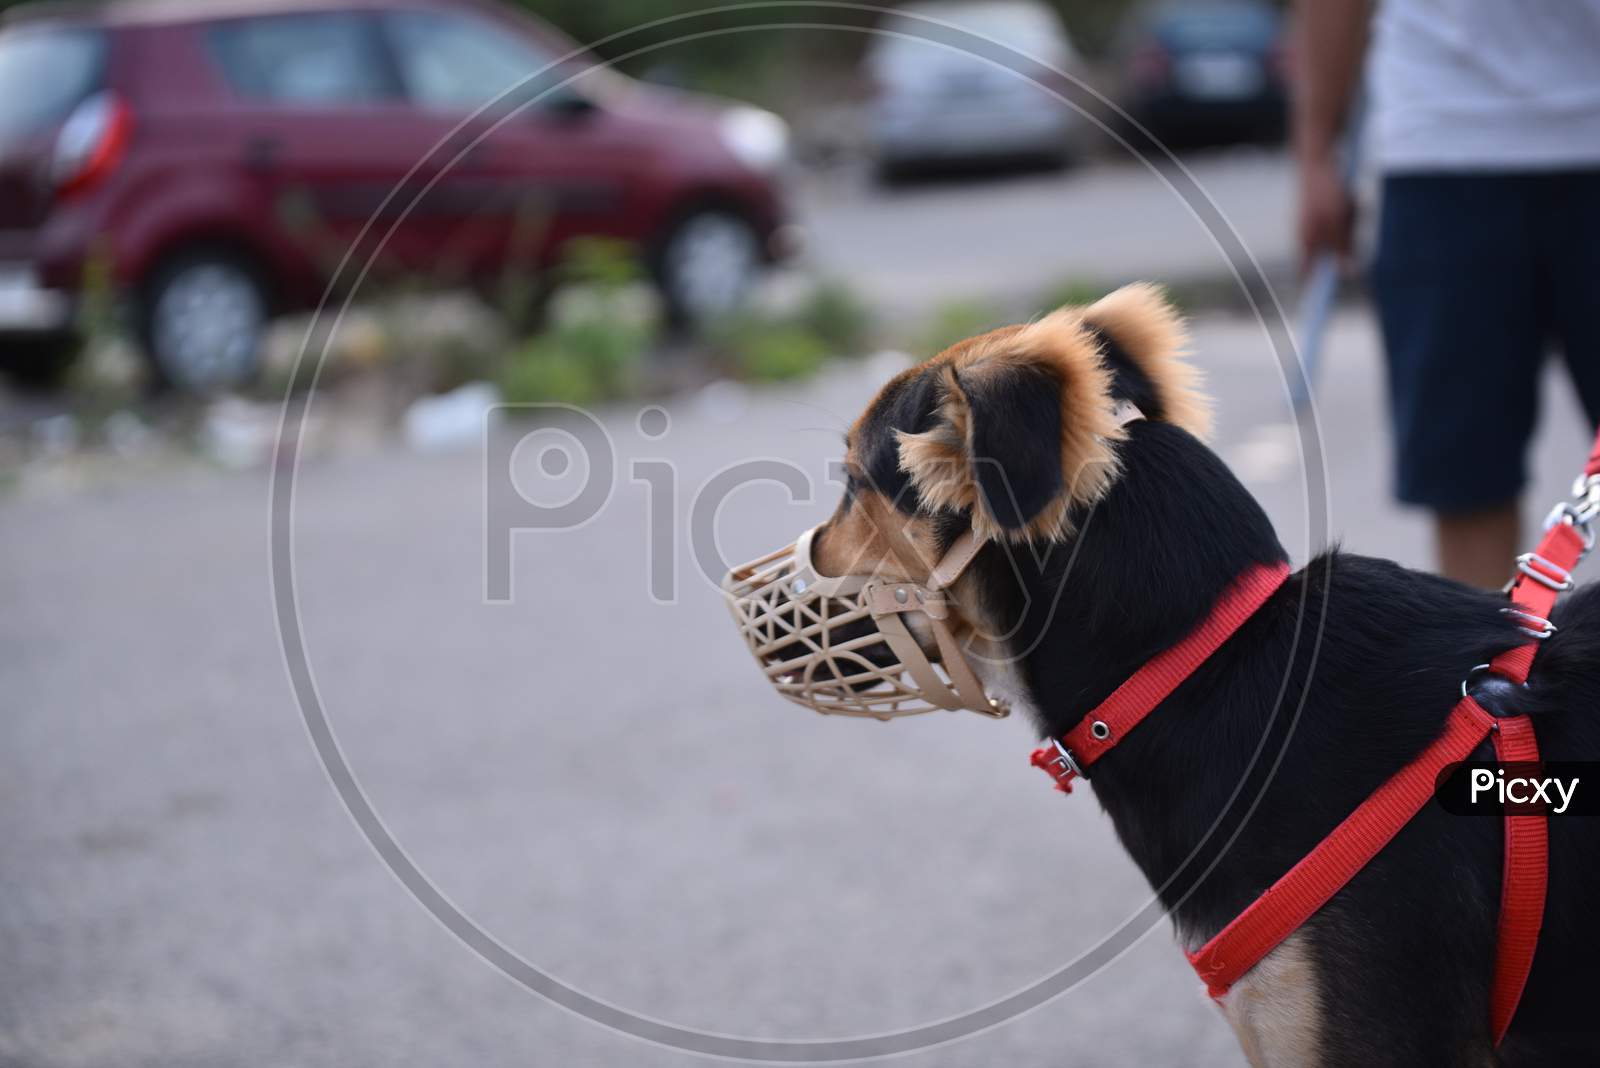 A pet dog seen with a face mask amid fears of coronavirus, Hyderabad, May 22, 2020